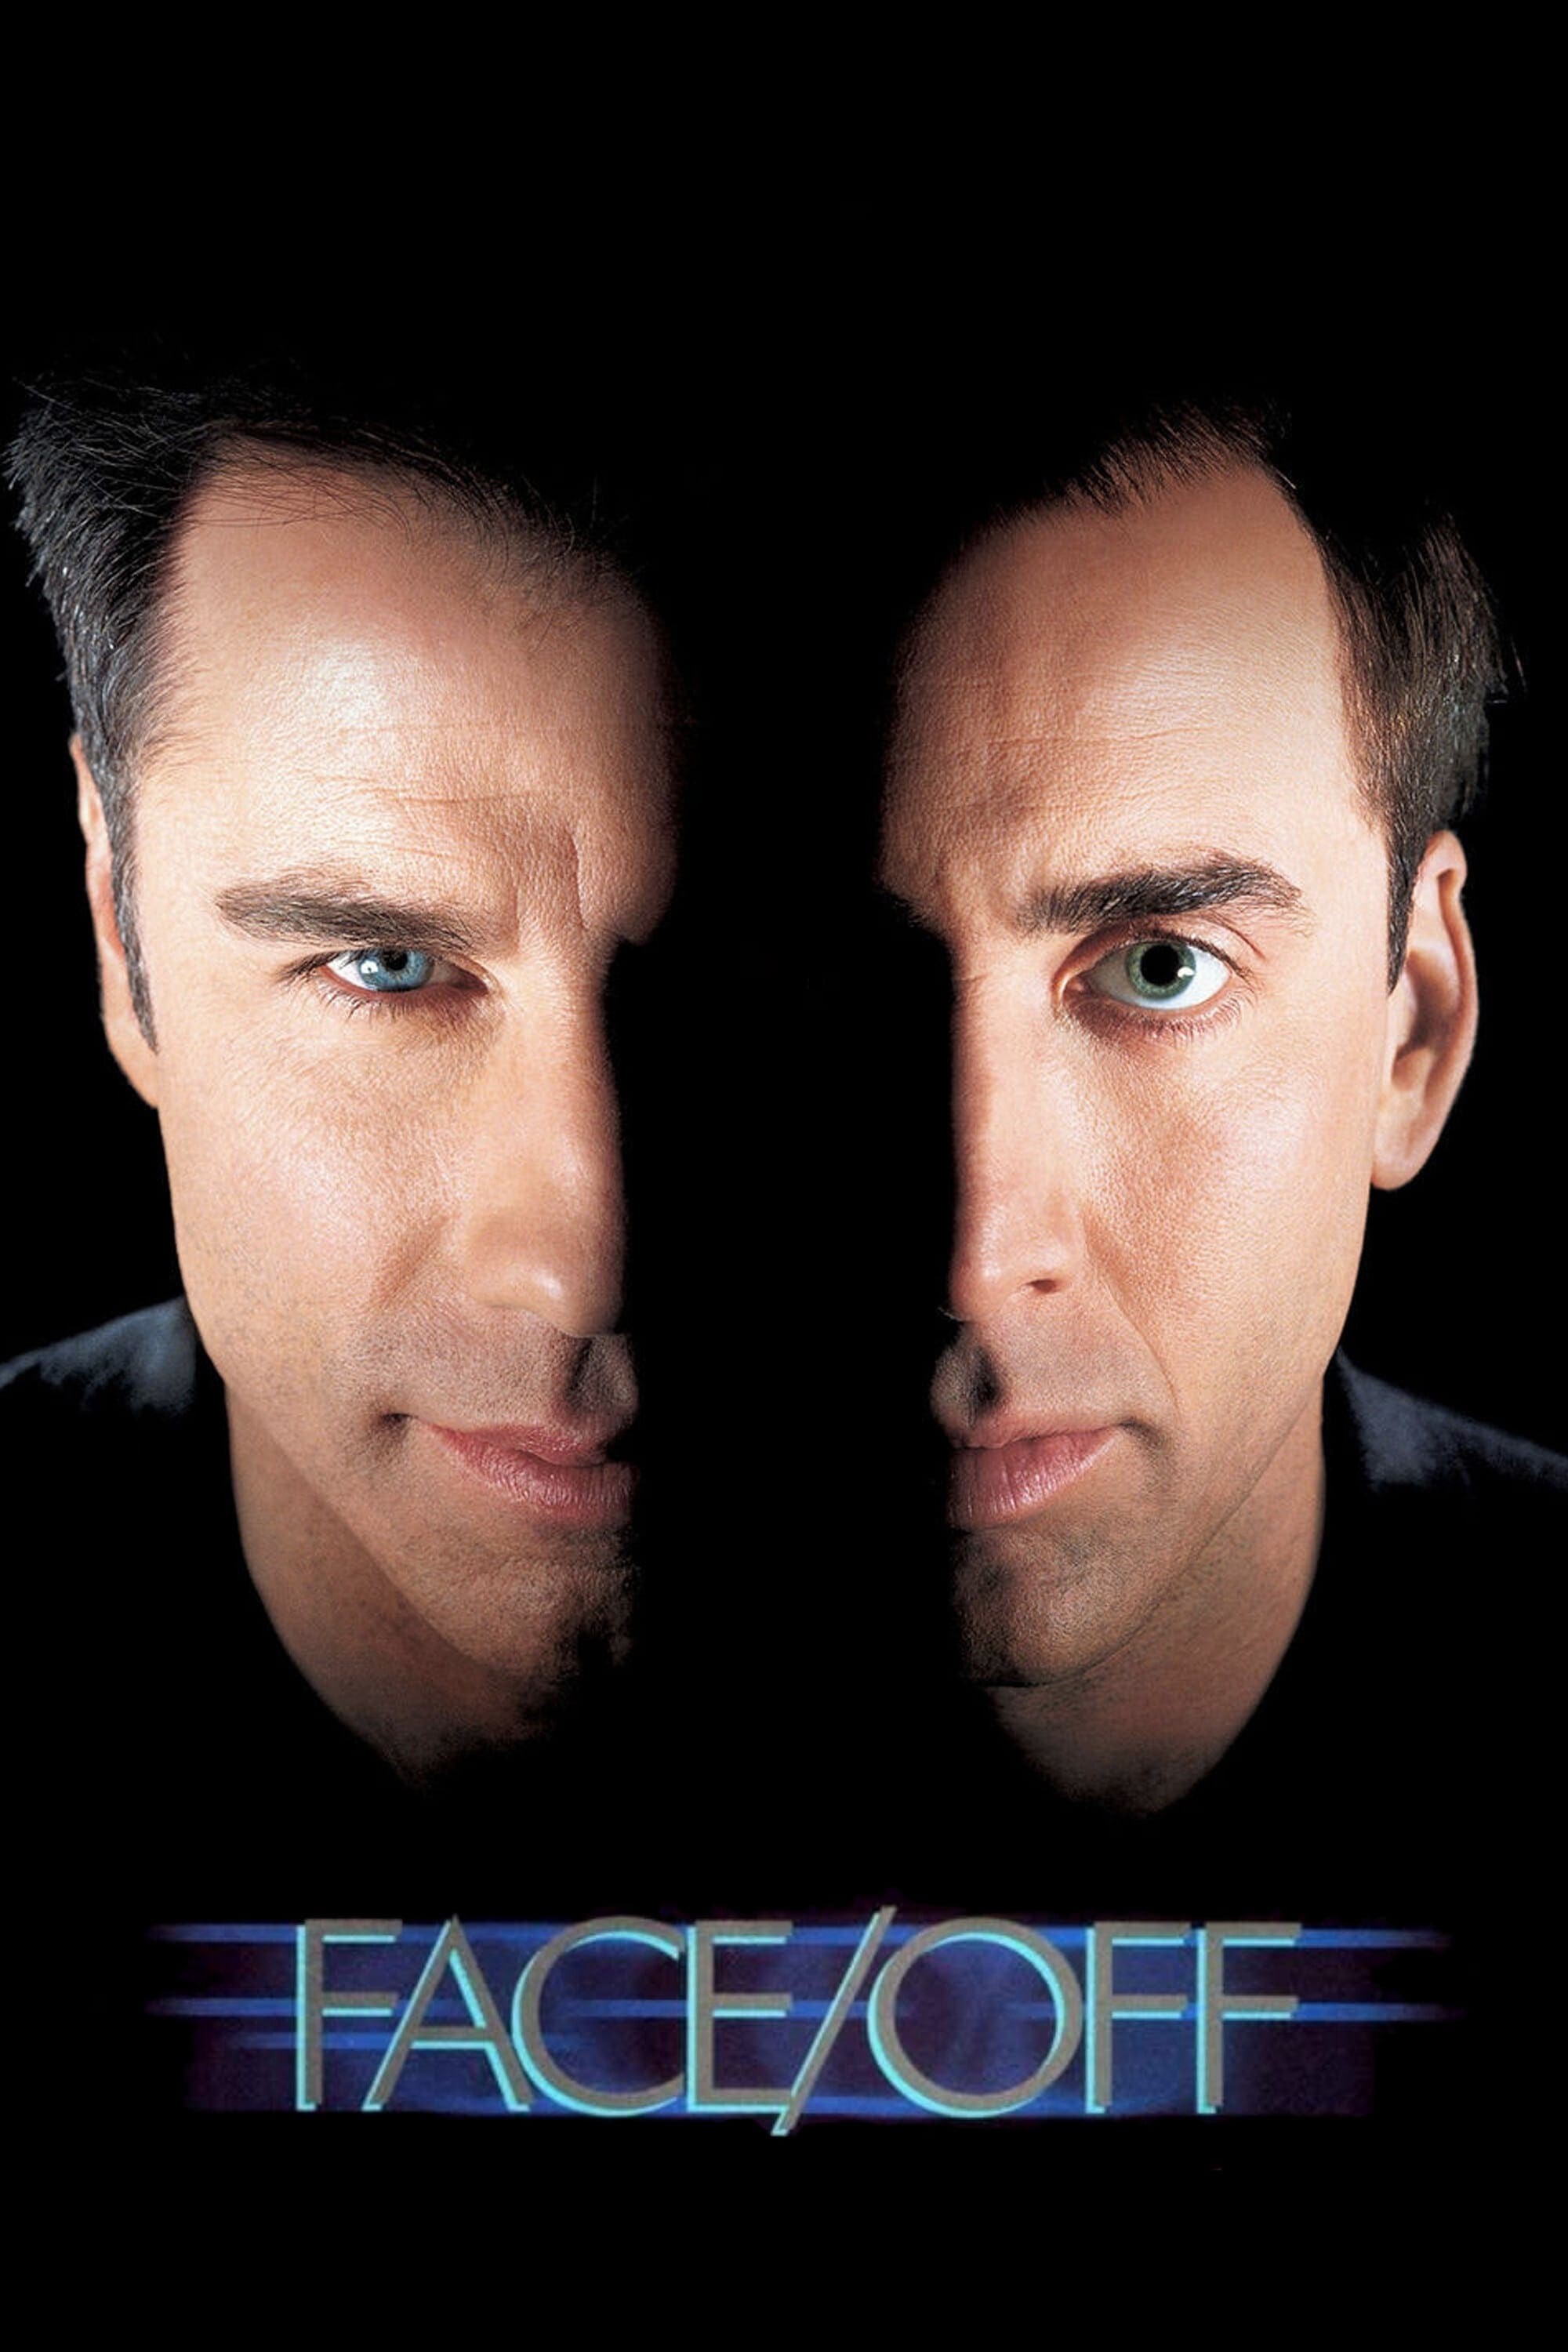 Face/Off (Face/Off) [1997]